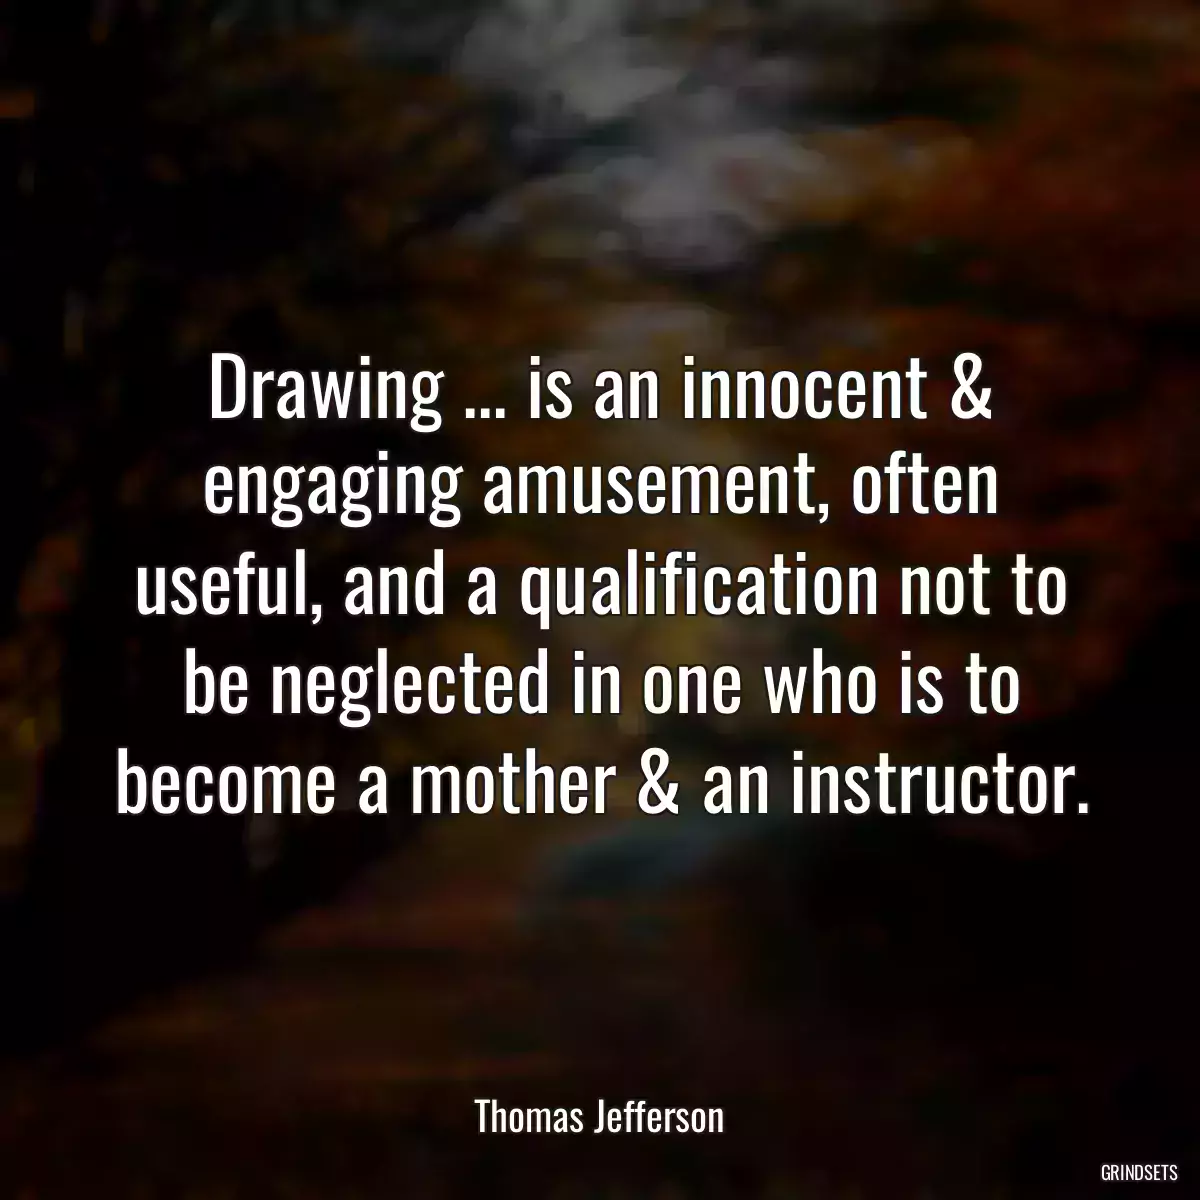 Drawing ... is an innocent & engaging amusement, often useful, and a qualification not to be neglected in one who is to become a mother & an instructor.